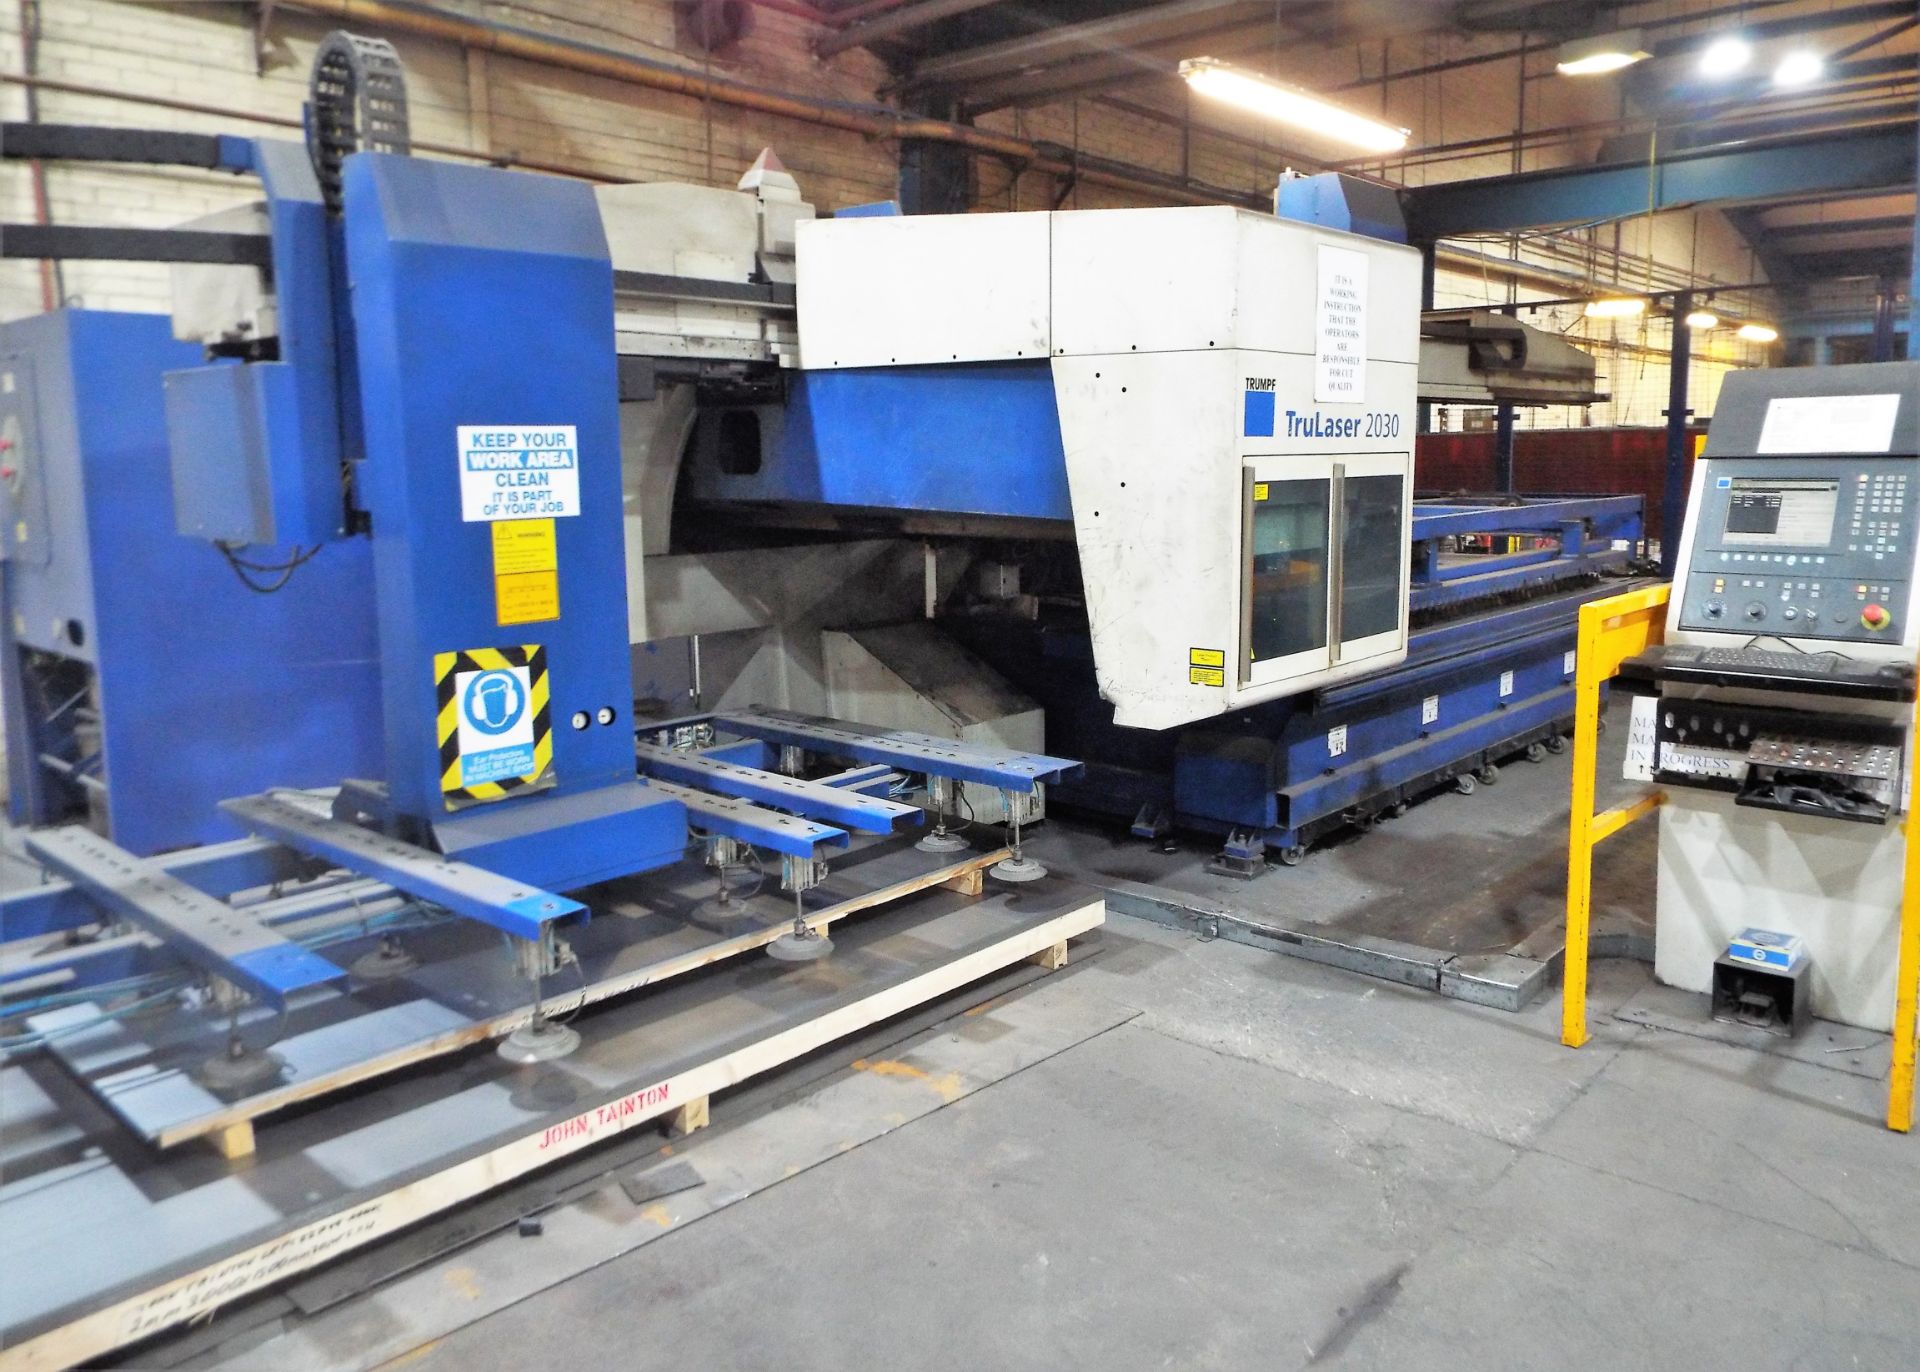 Trumpf 2030 TruCoax 2000 Laser Cutting Cell.